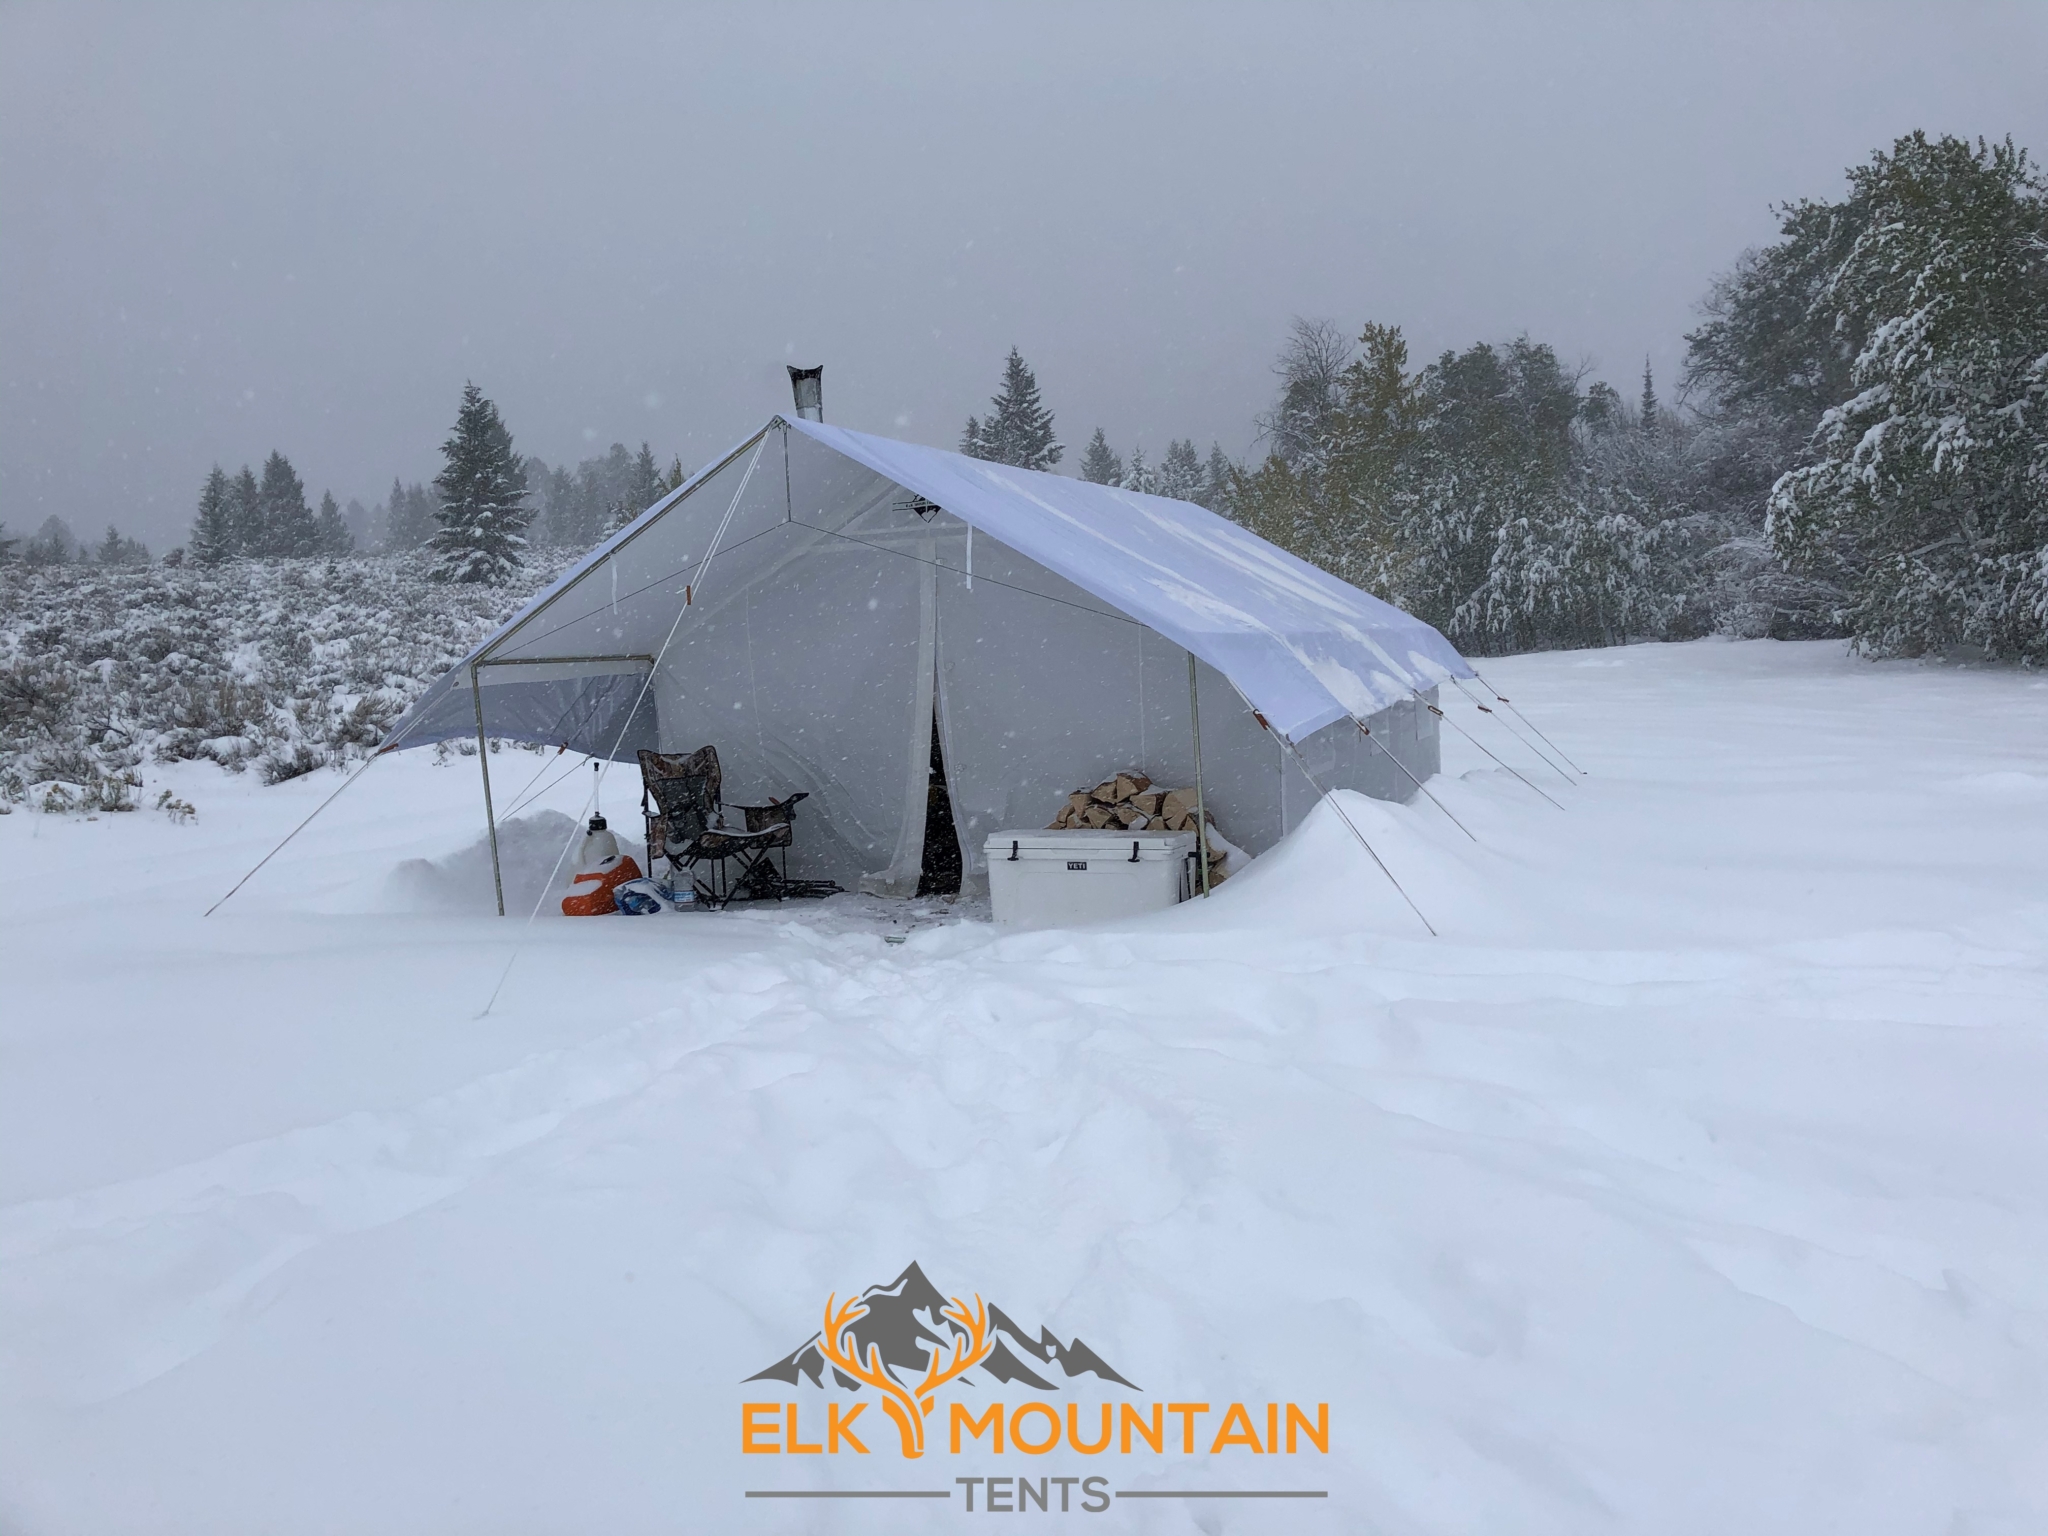 second hand canvas tents for sale second hand canvas tents for sale canvas glamping tent tent shop best wall tents tent set up hunting camper elk mountain tents